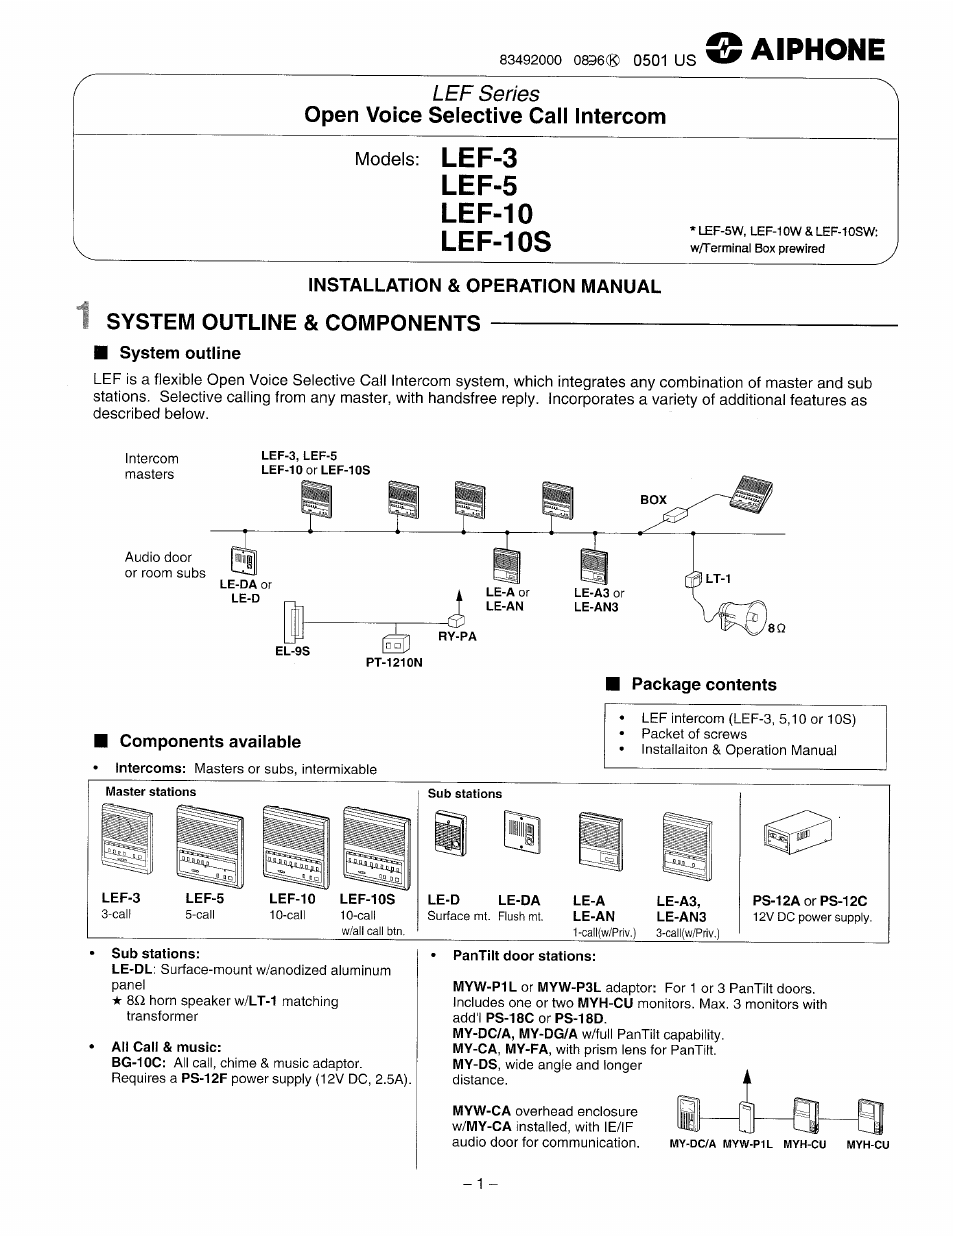 Aiphone LEF-3 User Manual | 12 pages | Also for: LEF-10, LEF-5, LEF-10S